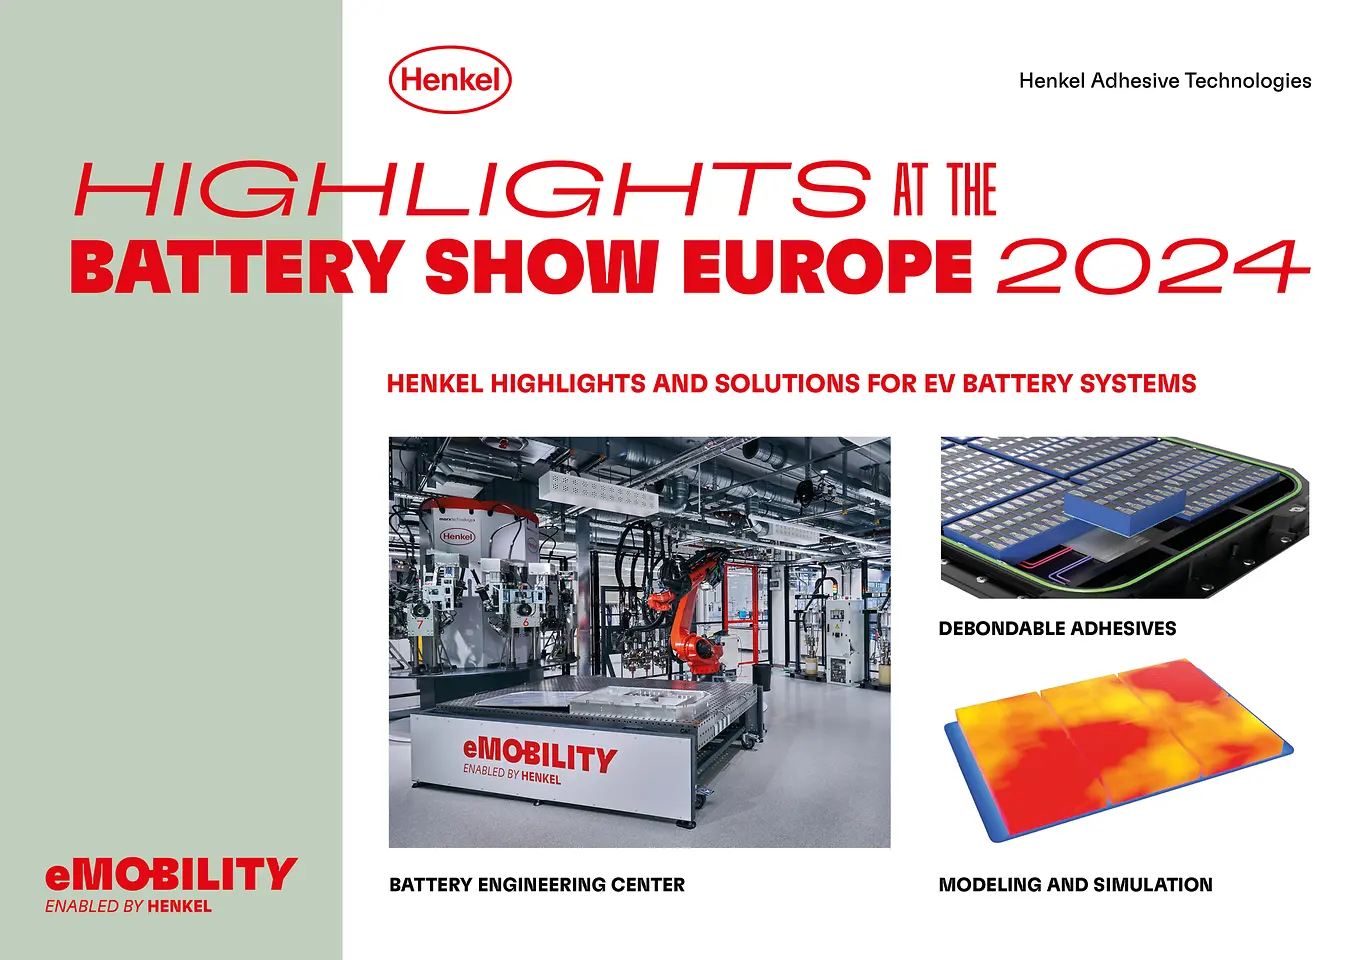 
Henkel highlights at the Battery Show Europe 2024